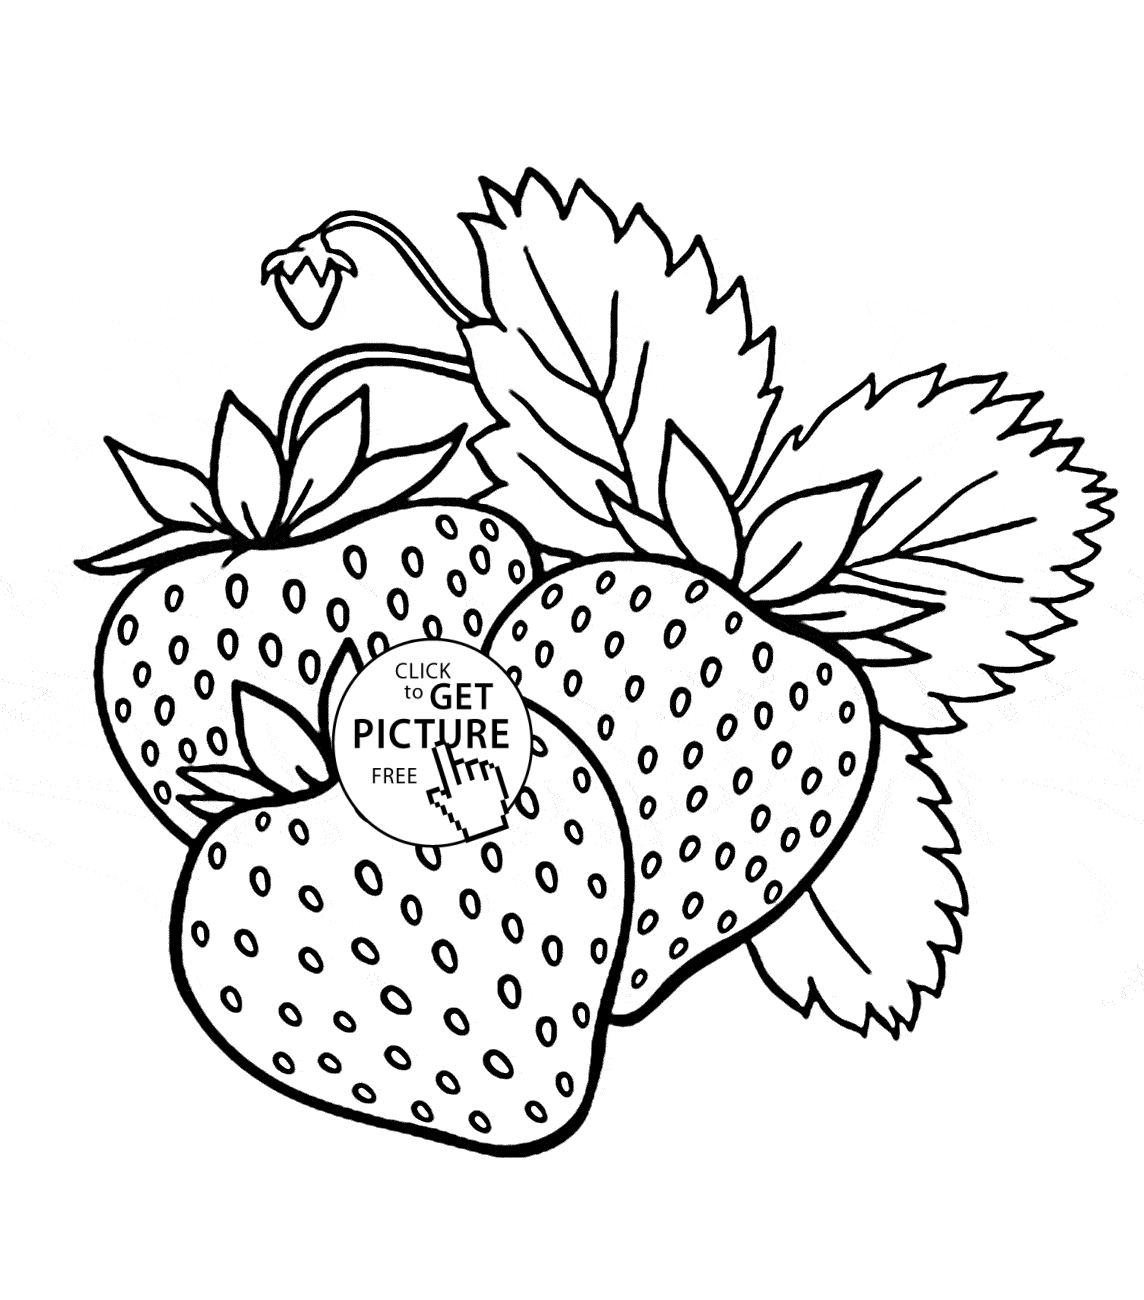 Yummy Strawberries Fruit coloring page for kids, fruits coloring ...